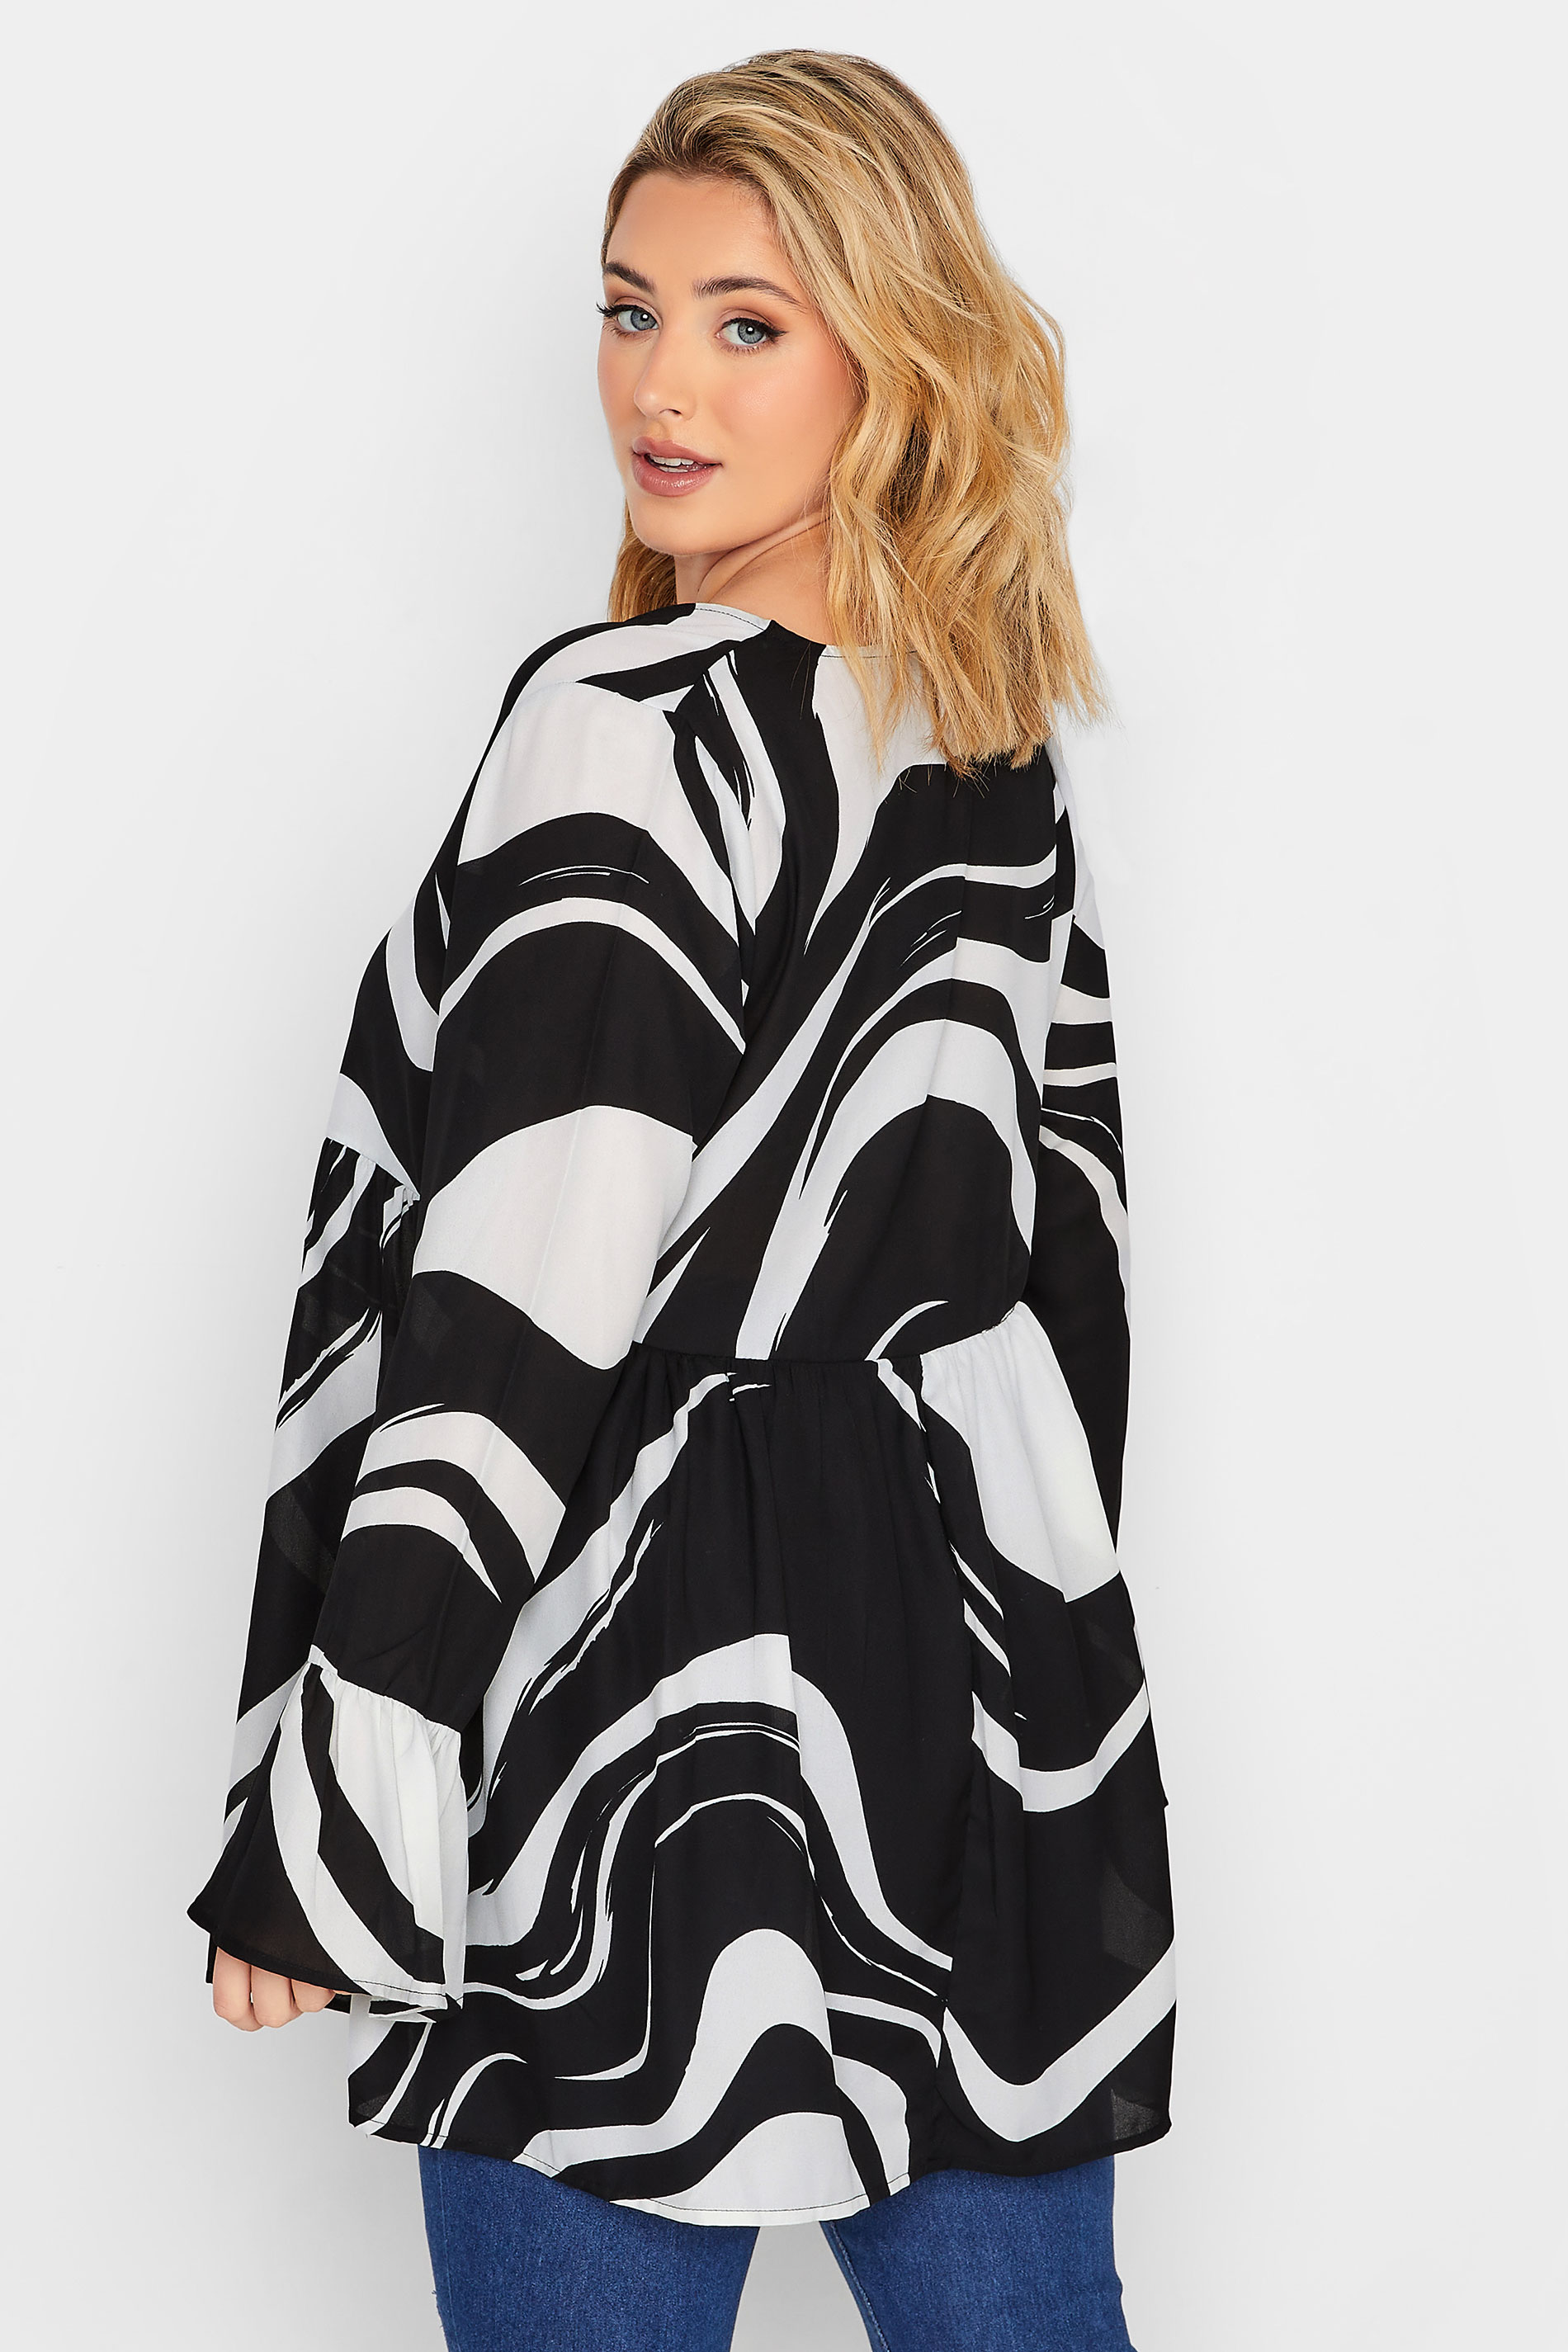 LIMITED COLLECTION Plus Size Curve Black & White Marble Print Blouse | Yours Clothing 3